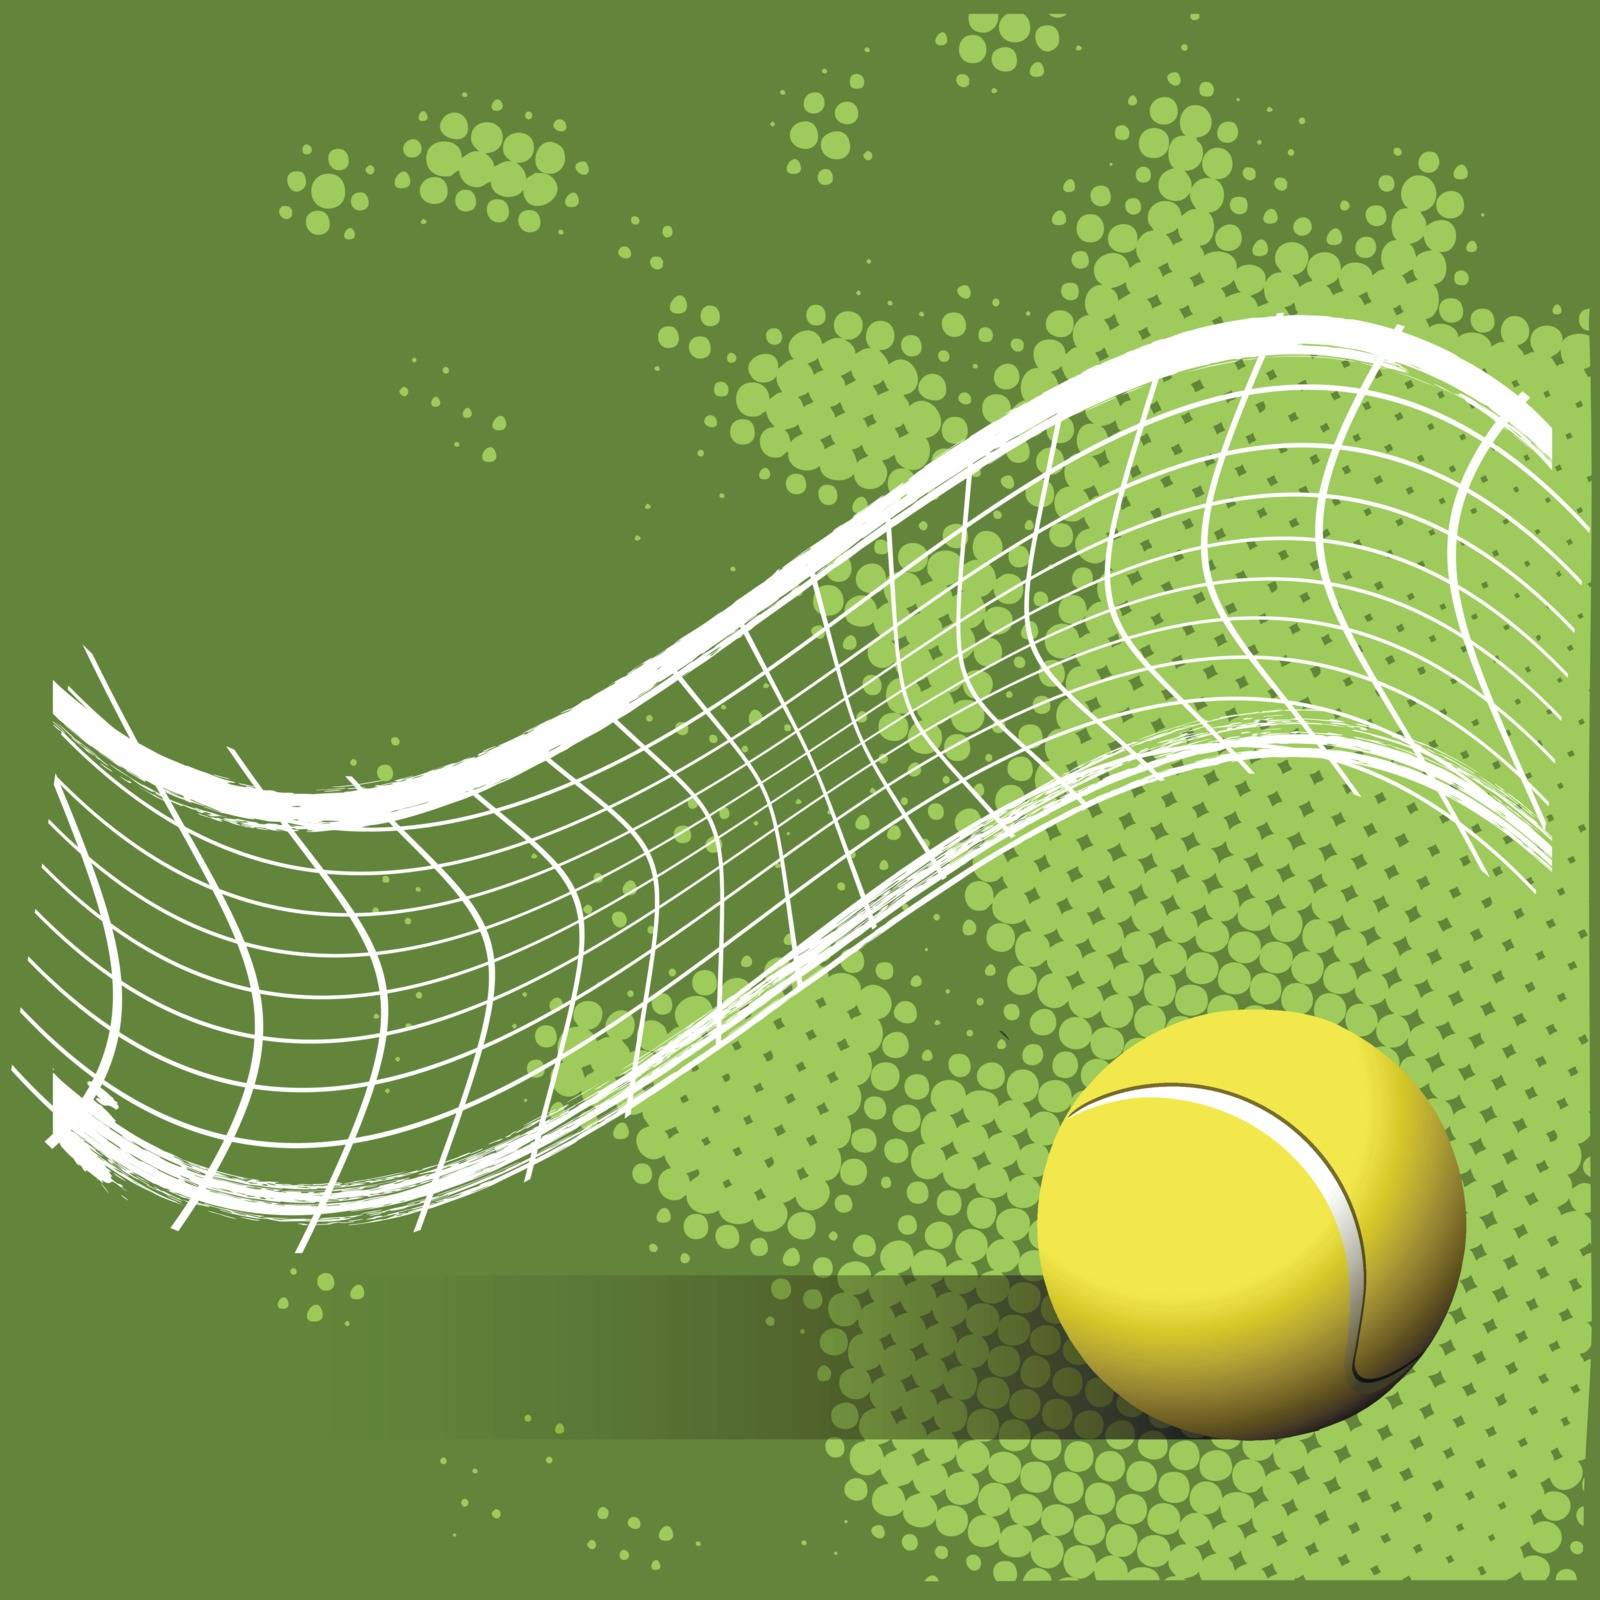 Tennis Ball and Grid on a Green Background by brux